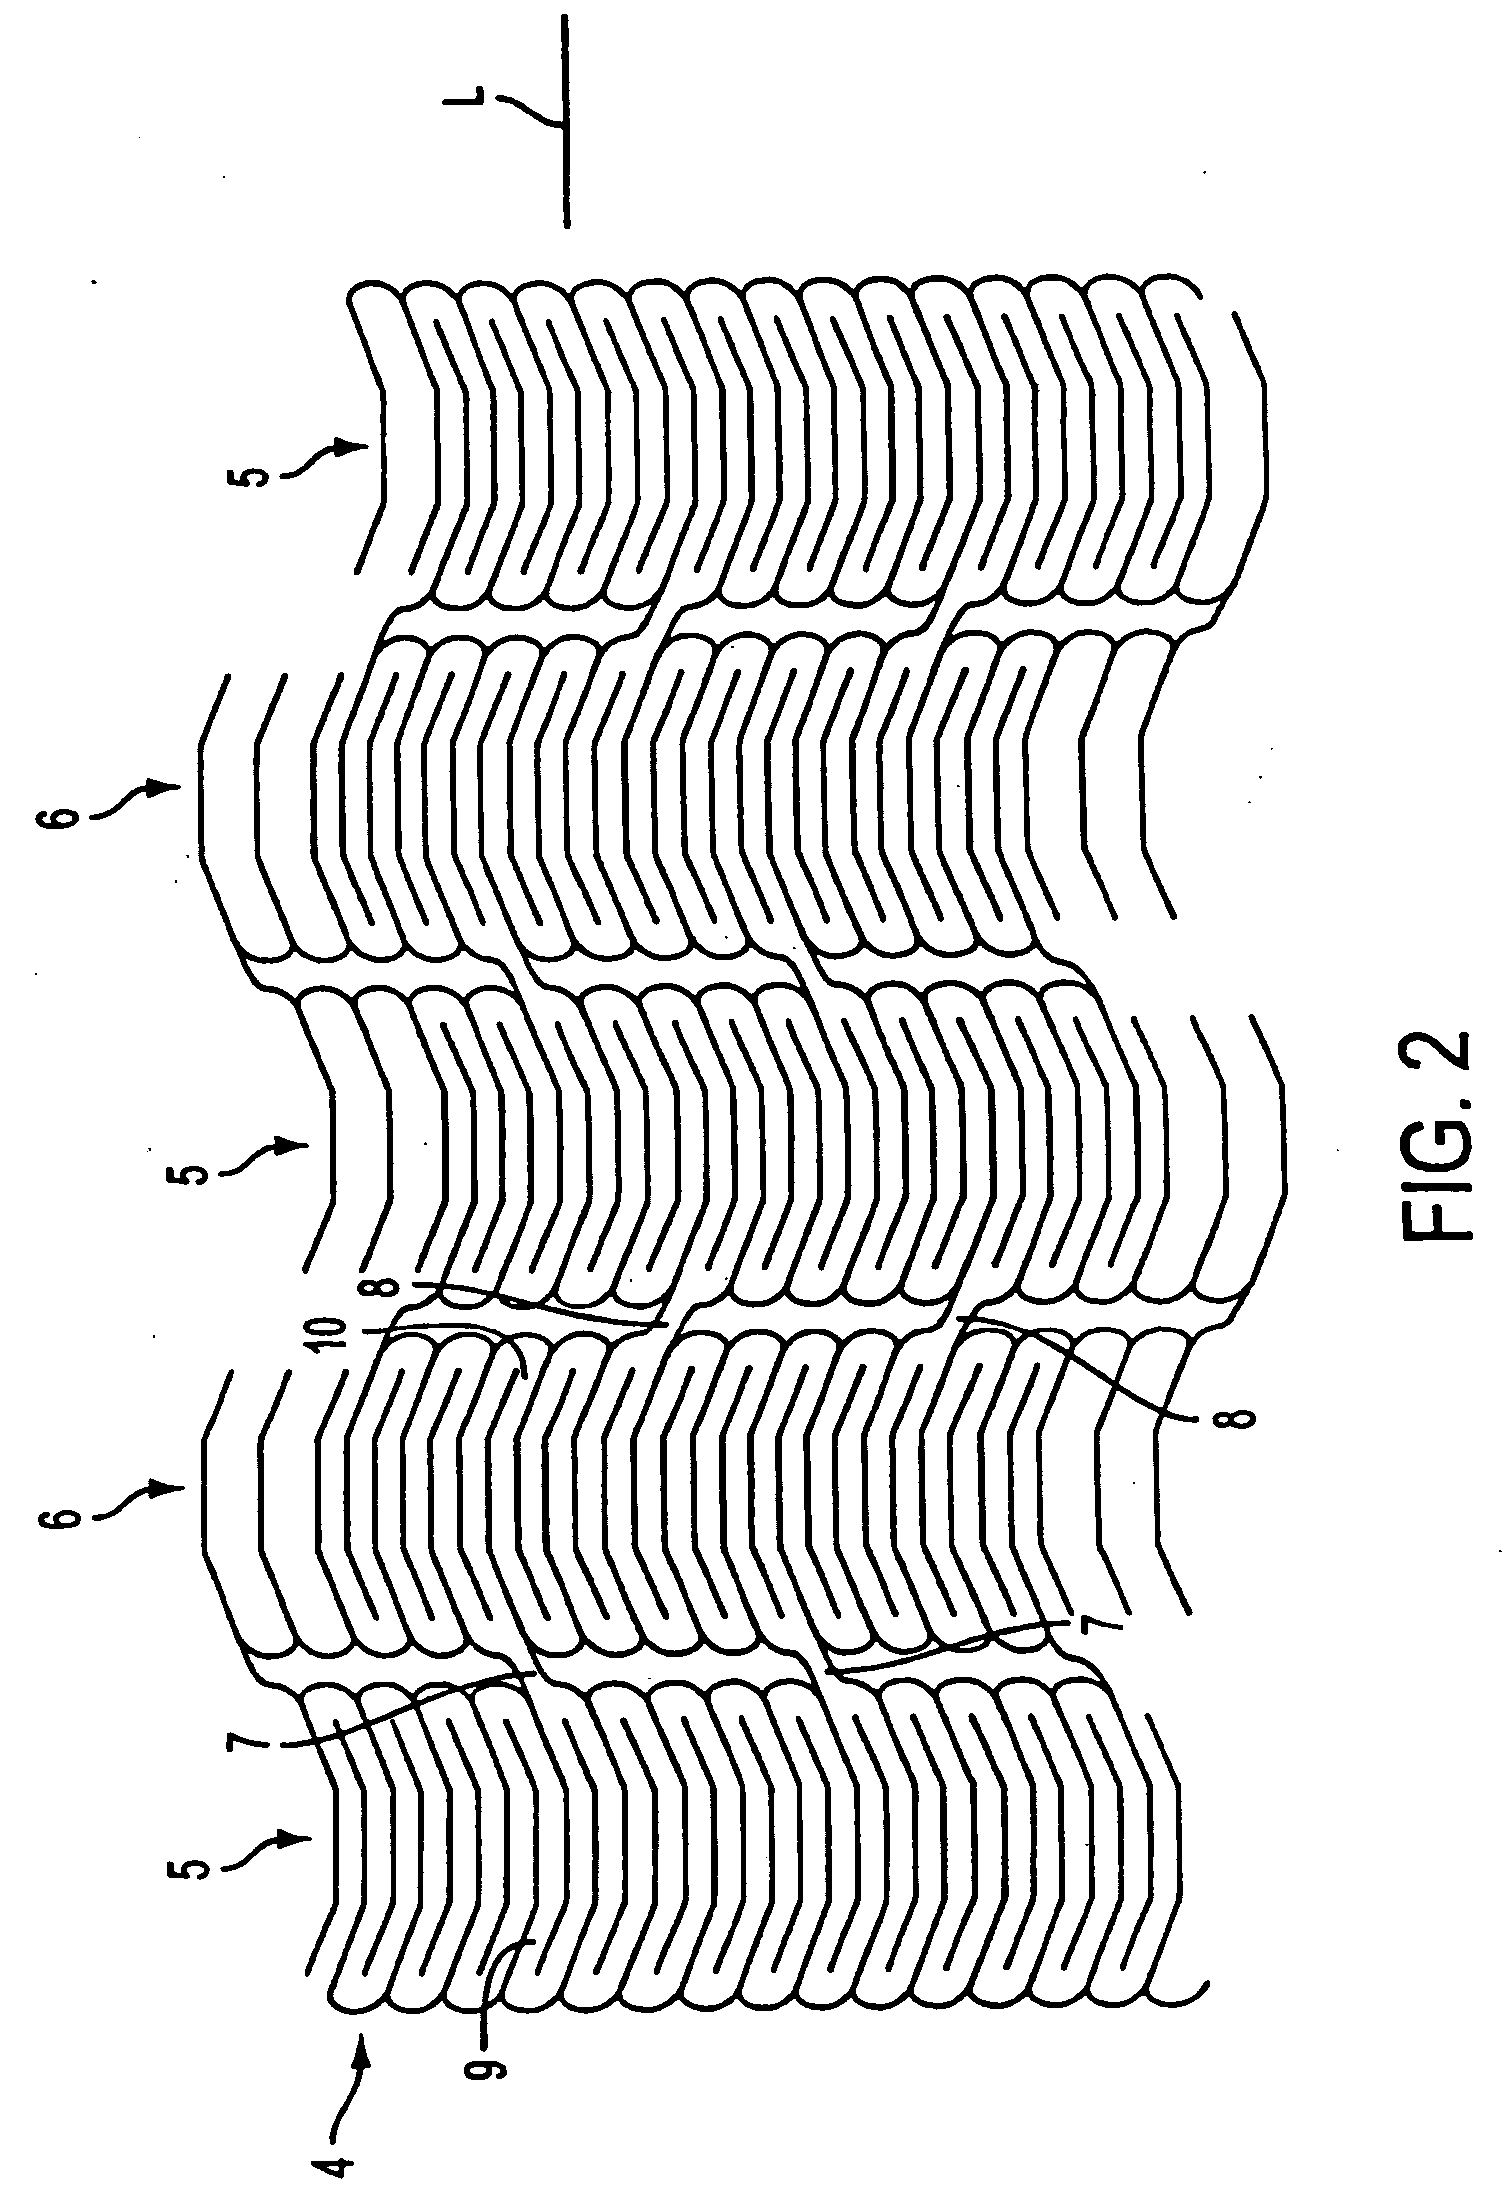 Methods and apparatus for a stent having an expandable web structure and delivery system